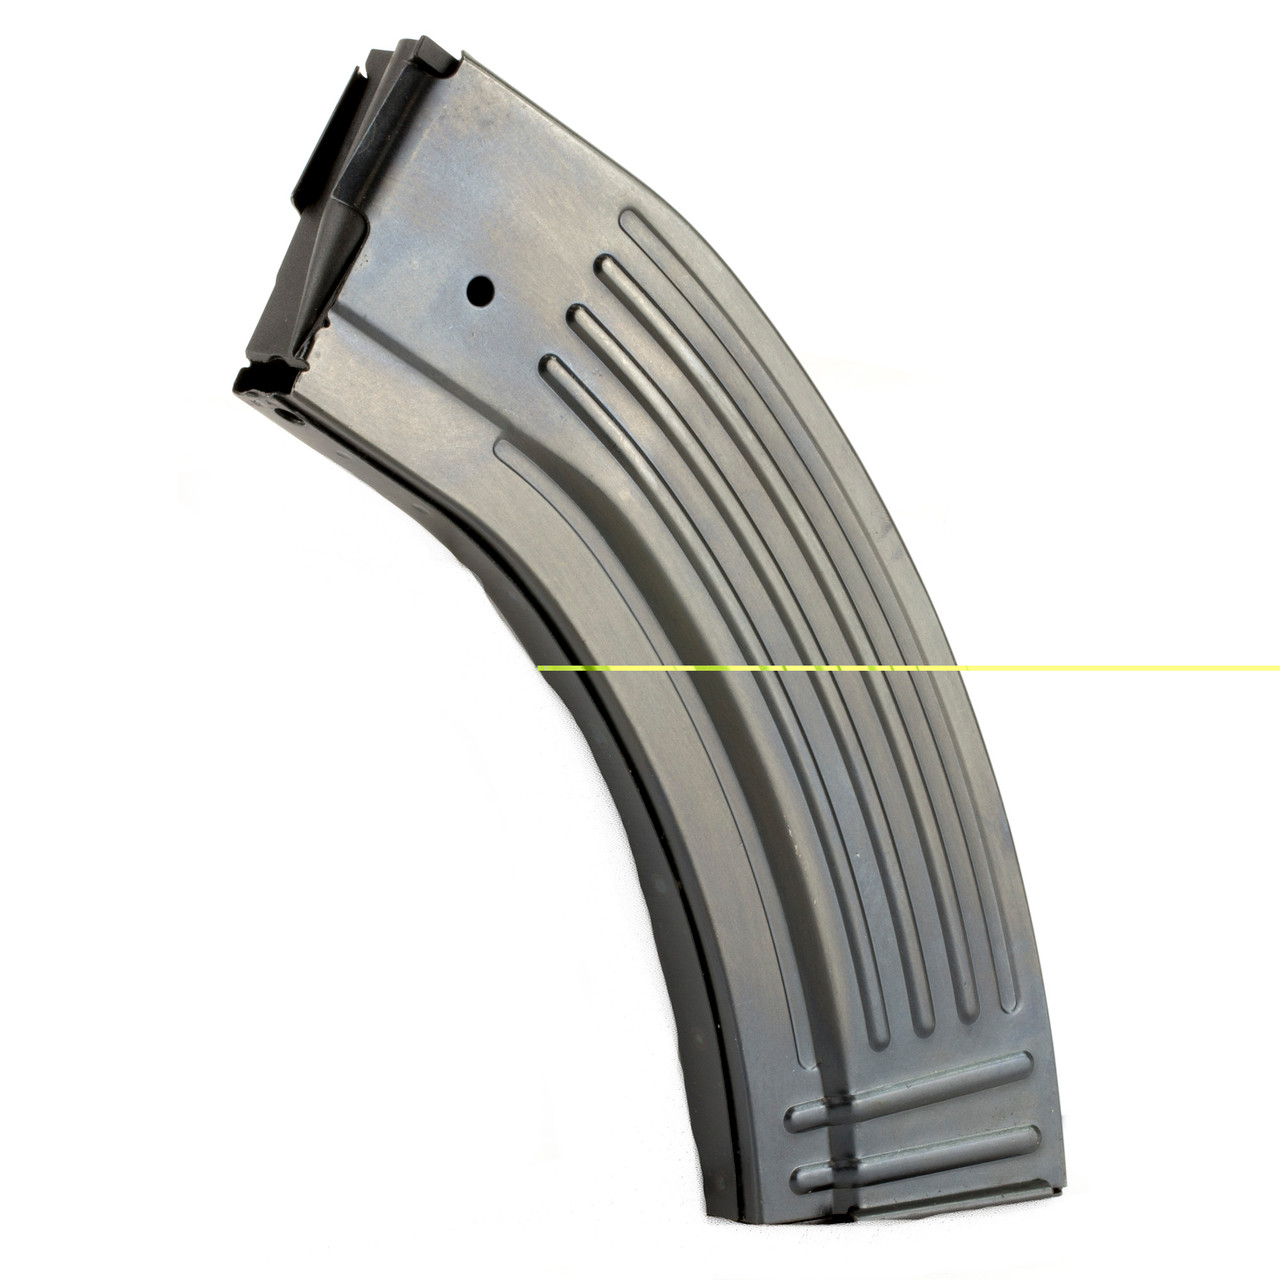 Promag Ruger Mini 30 762x39 30rd Bl